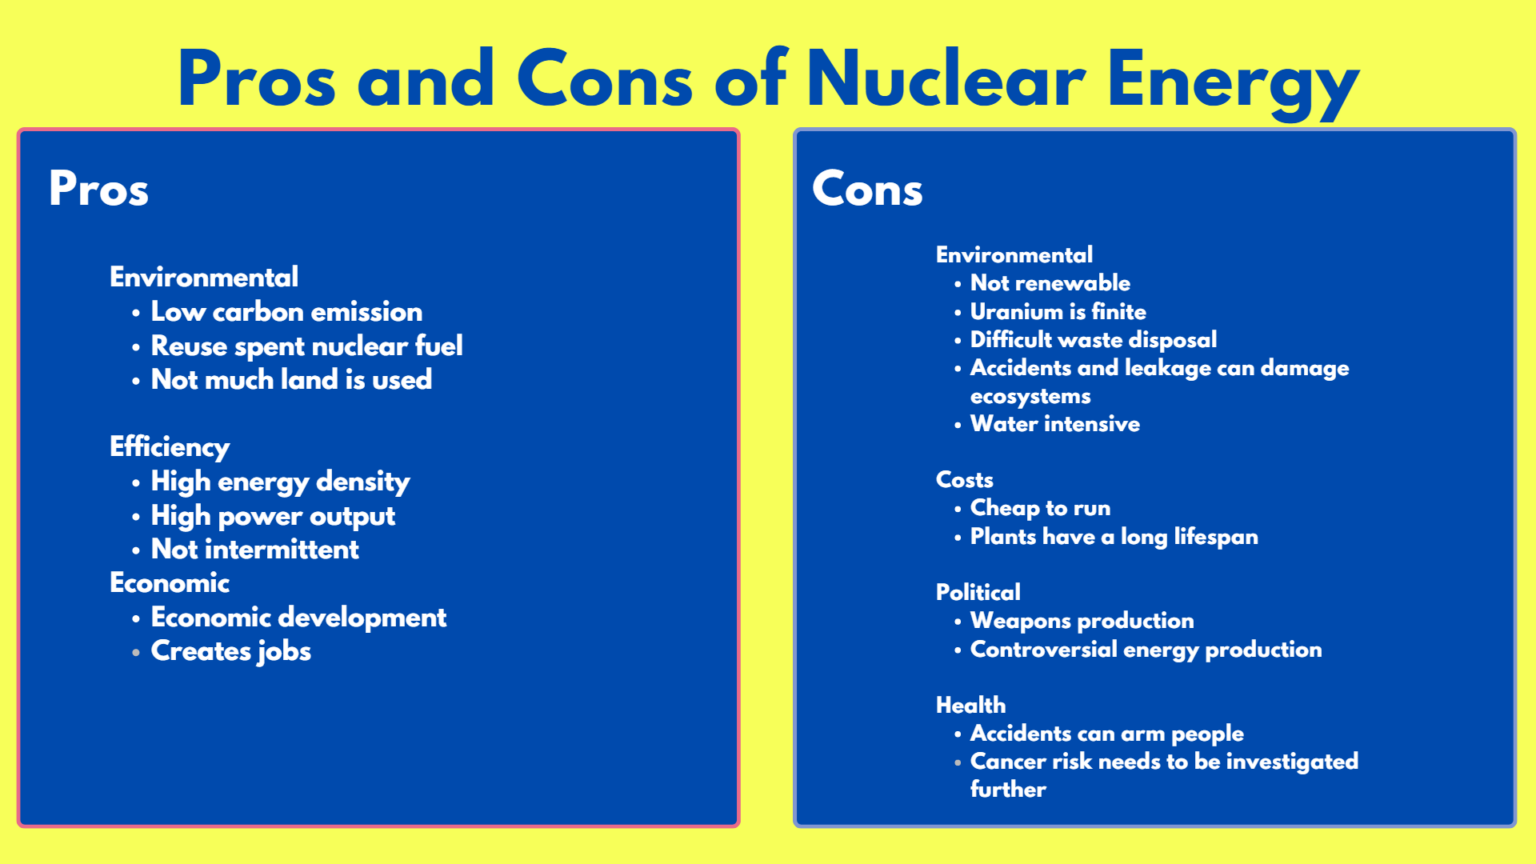 pros and cons of nuclear energy essay